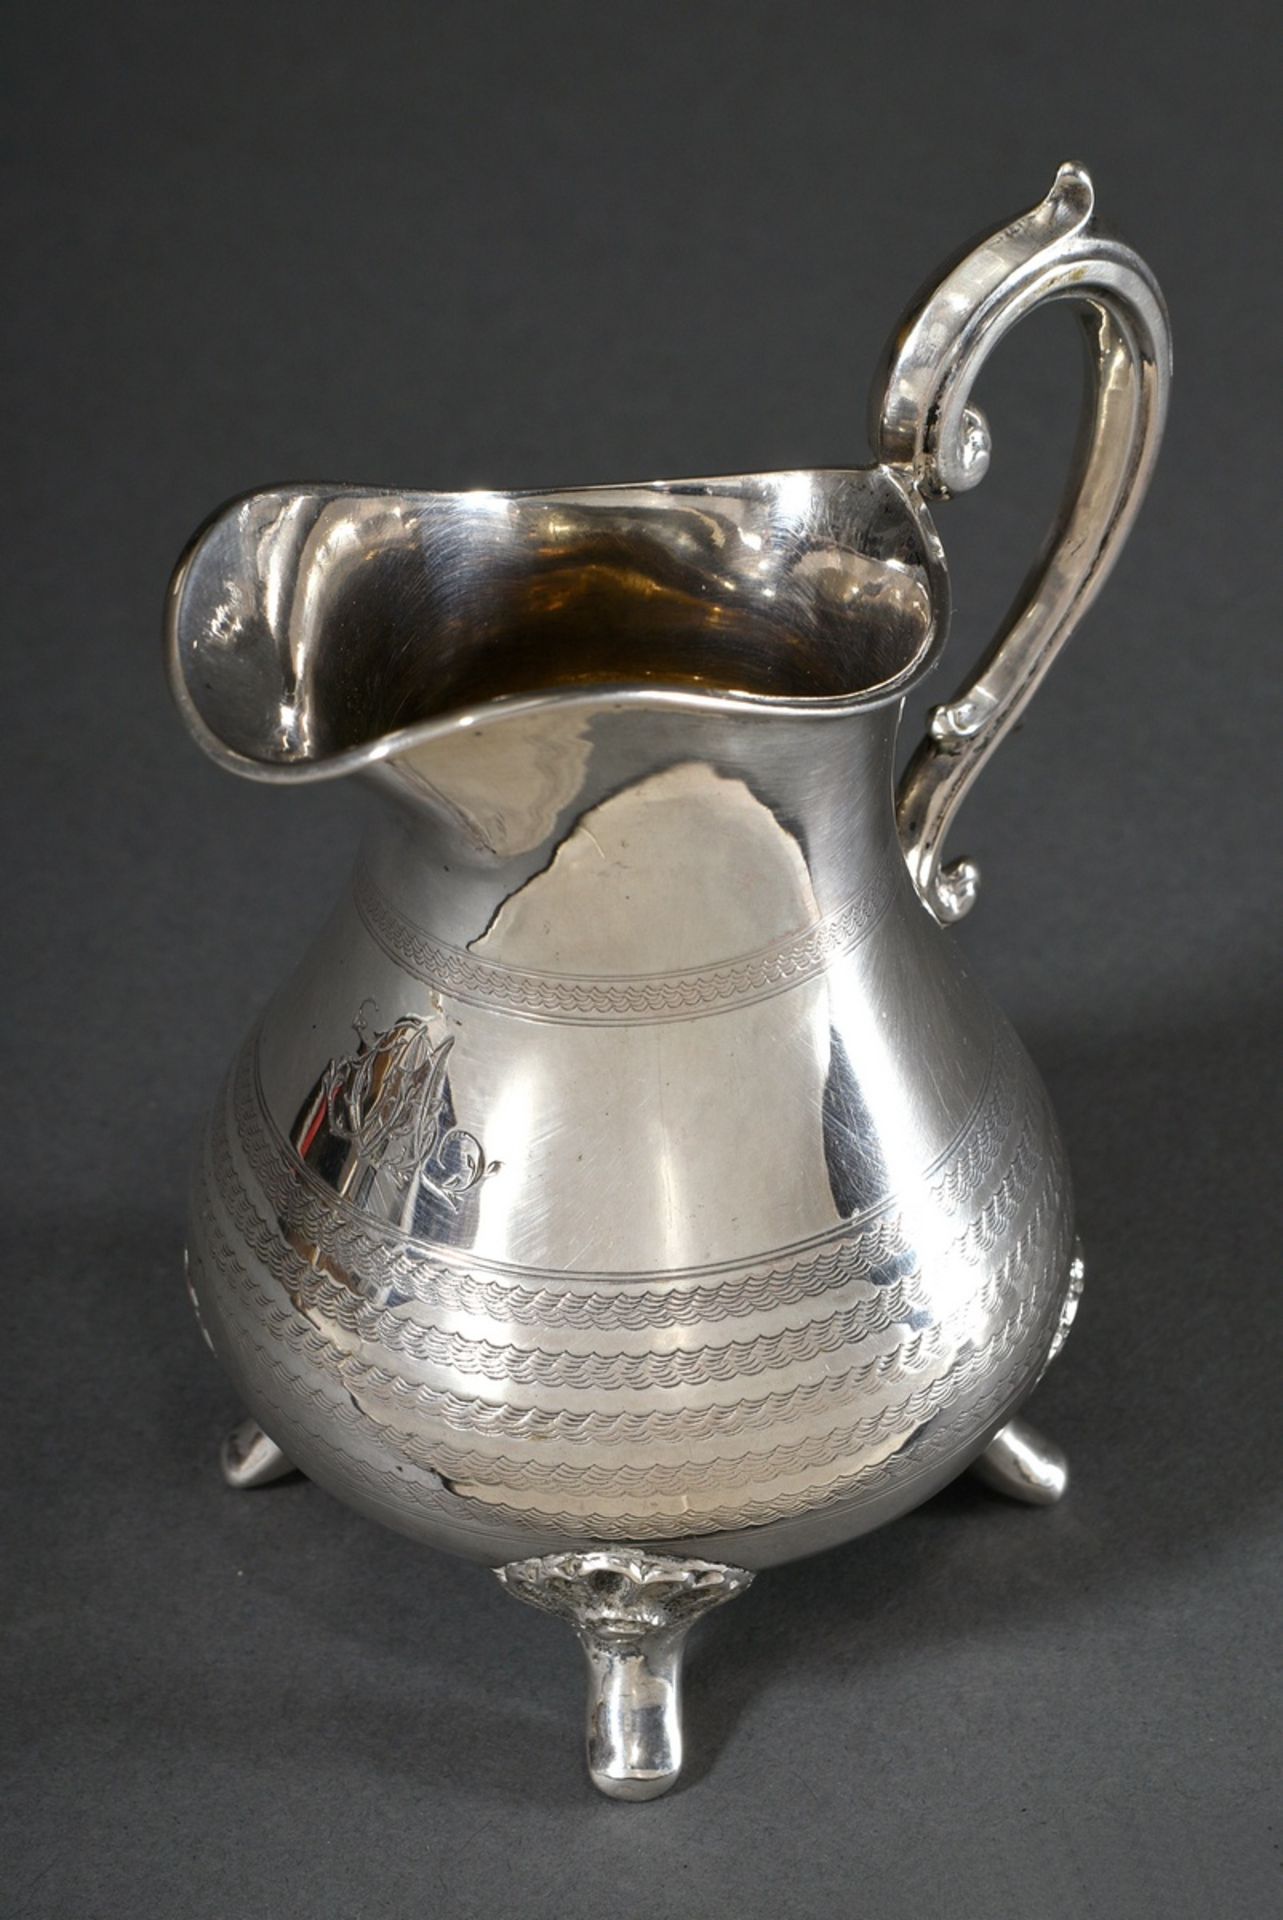 Cream jug on four shell feet with guilloché frieze, ligatured monogram engraving "CM" and curved ha